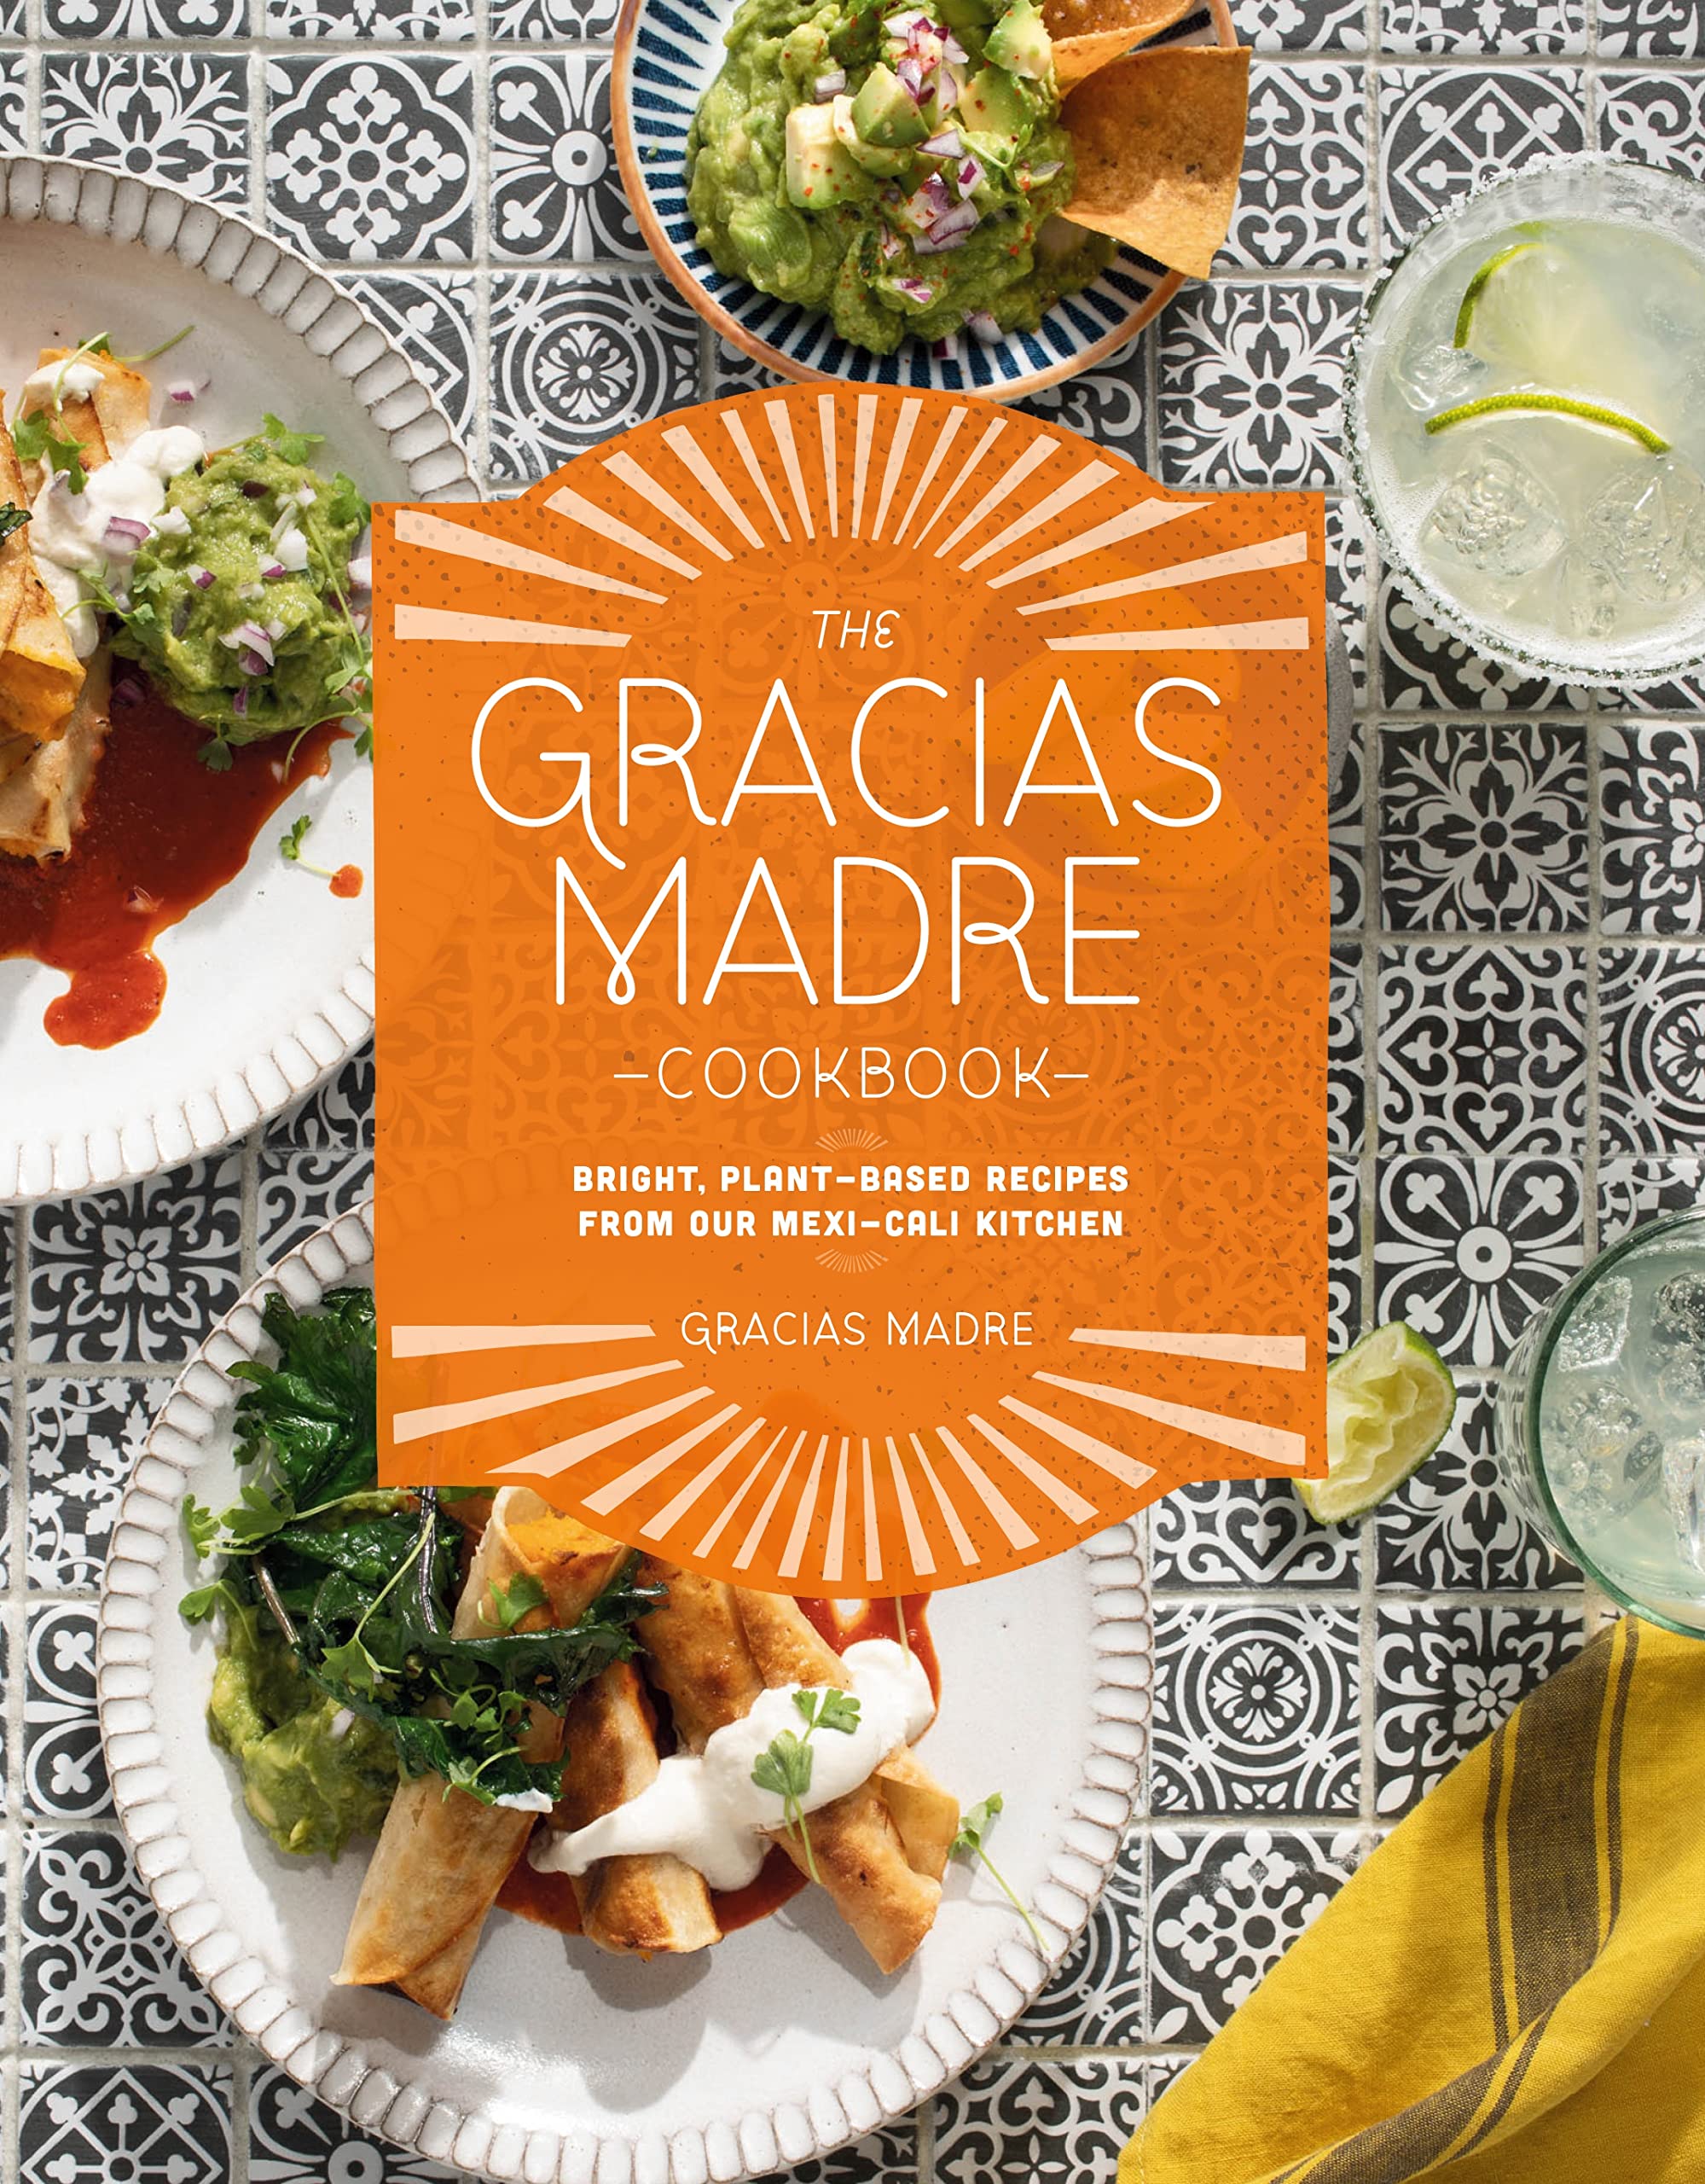 The Gracias Madre Cookbook: Bright, Plant-Based Recipes from Our Mexi-Cali Kitchen (Gracias Madre)